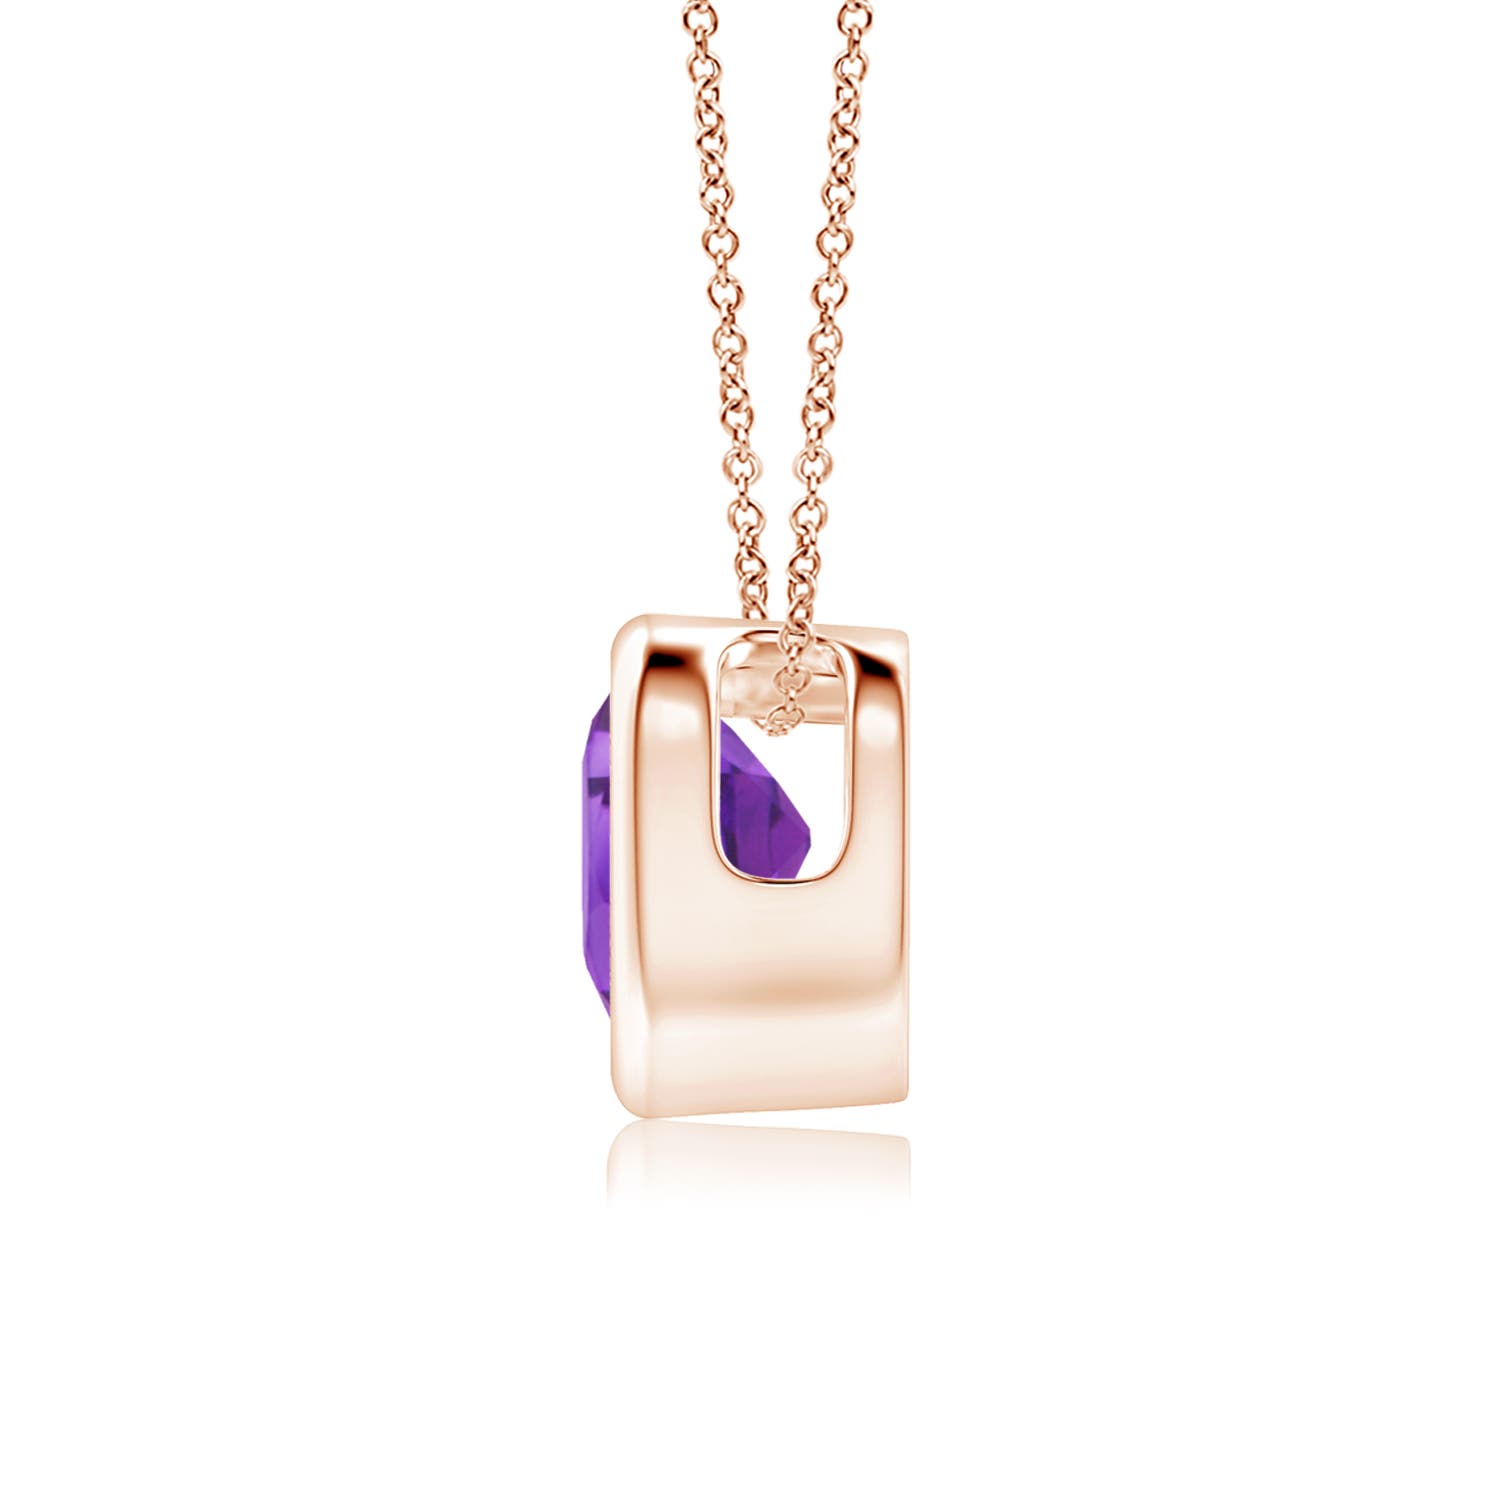 AA - Amethyst / 0.35 CT / 14 KT Rose Gold